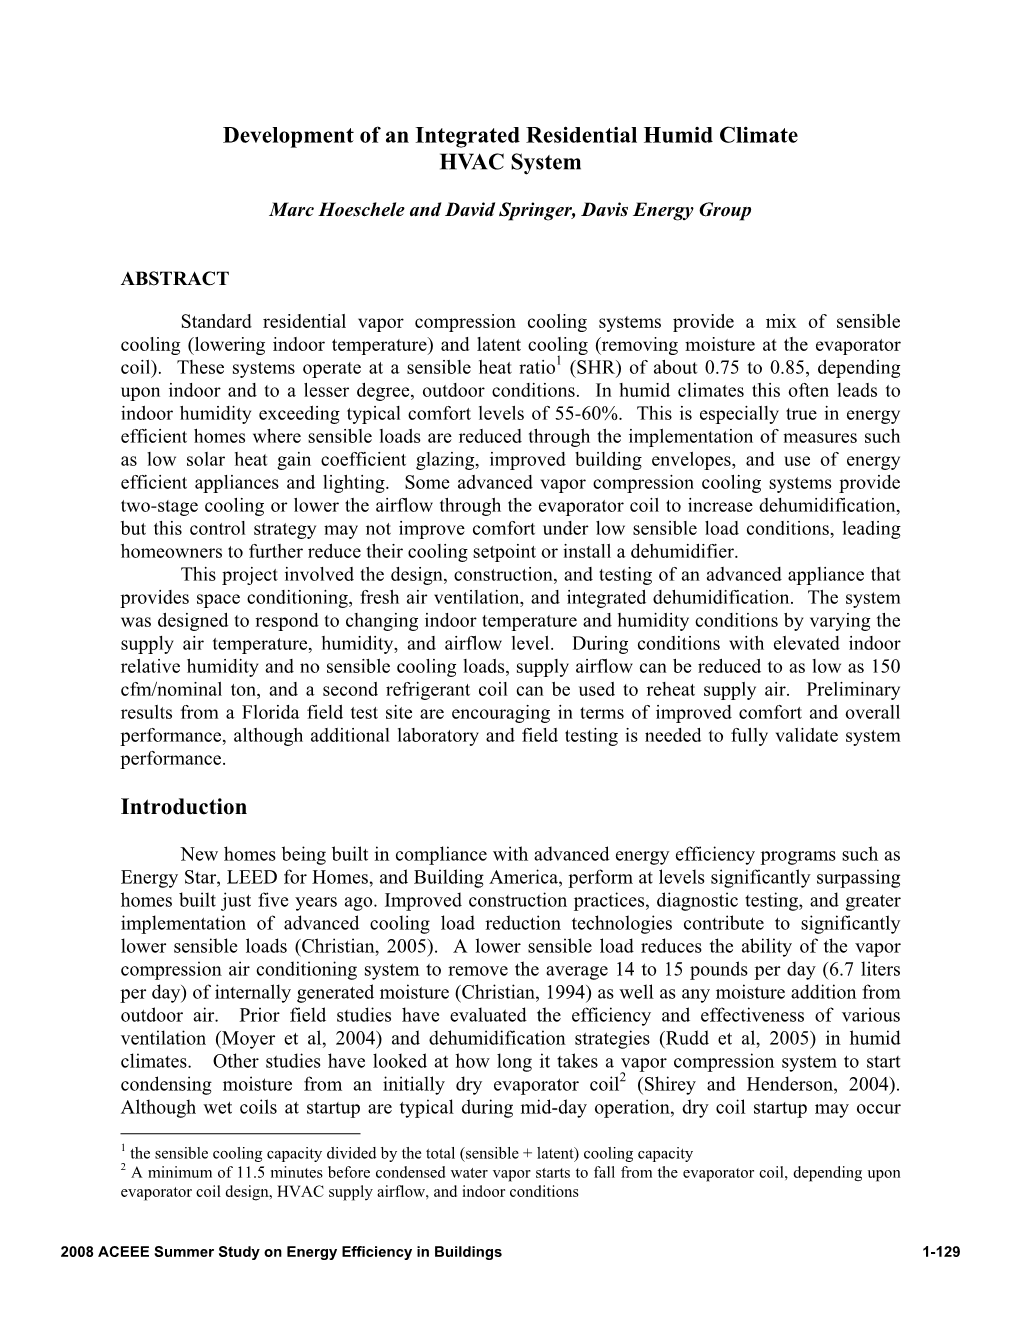 Development of an Integrated Residential Humid Climate HVAC System